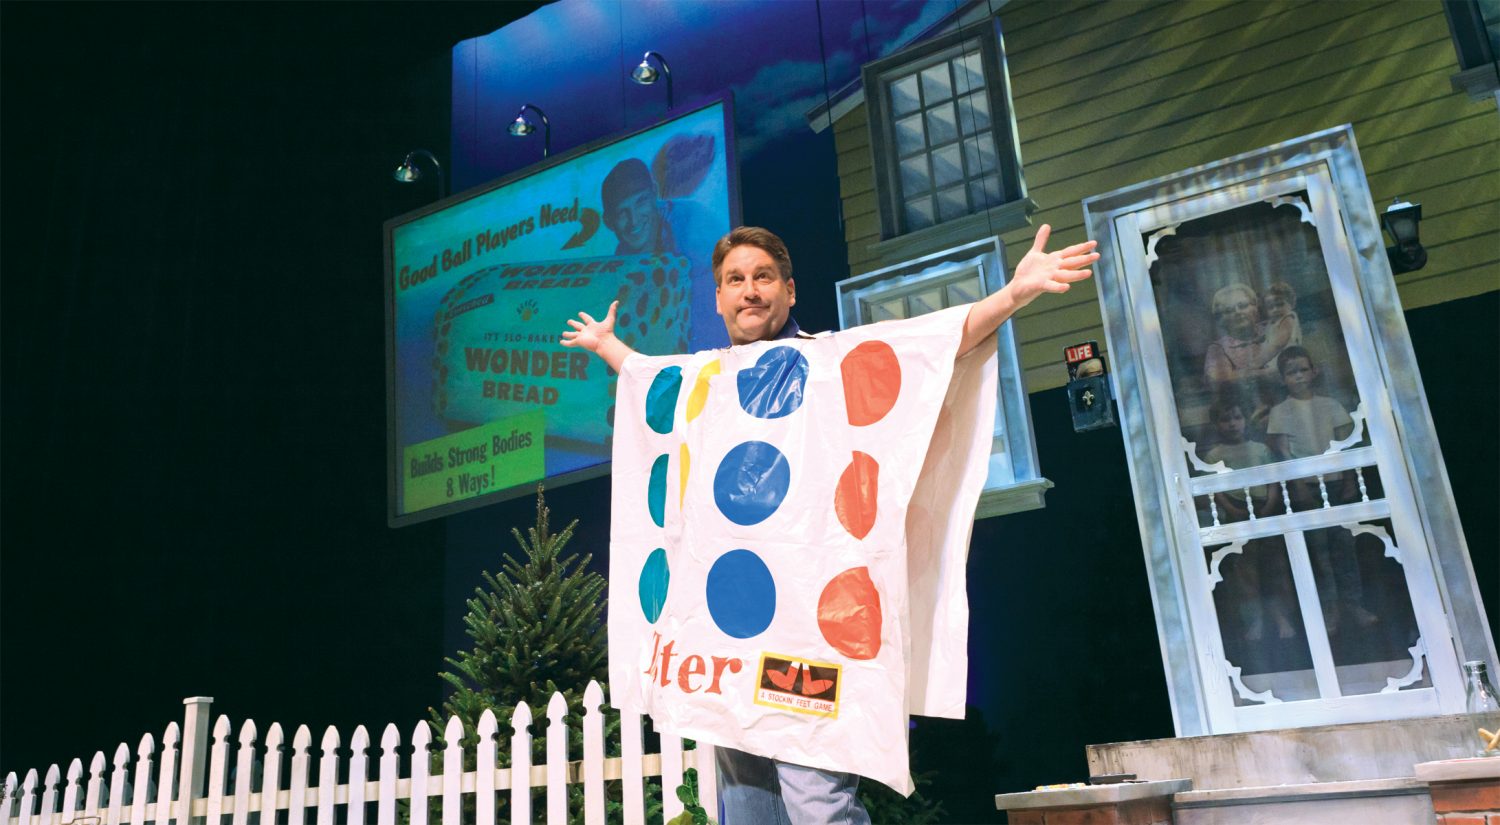 Pat Hazell brings his show "The Wonder Bread Years" to the LuCille Tack Center for the Arts on Oct. 22.